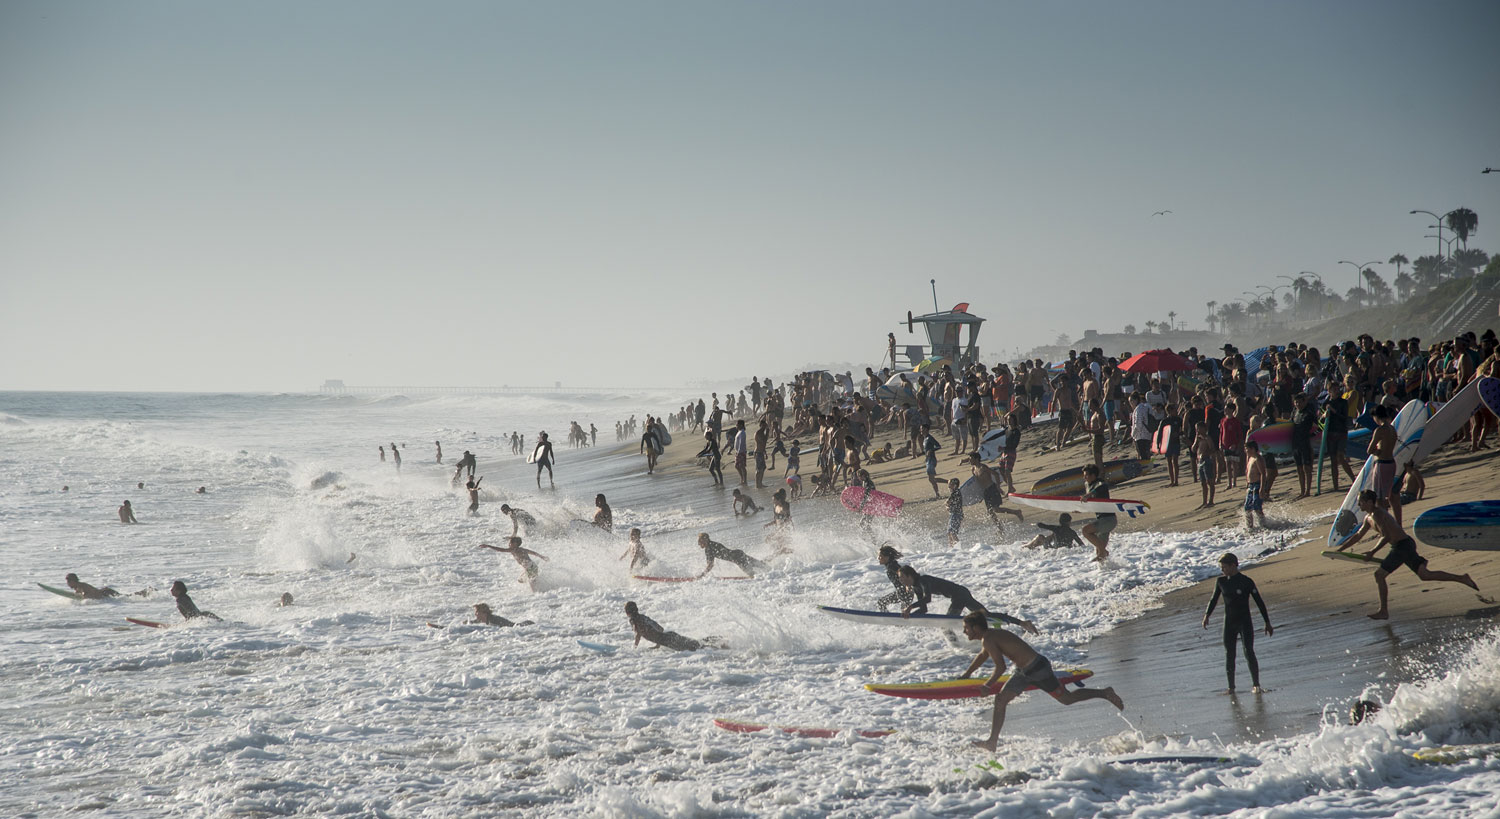 A mass of surfers crowd the beach and run into the water.